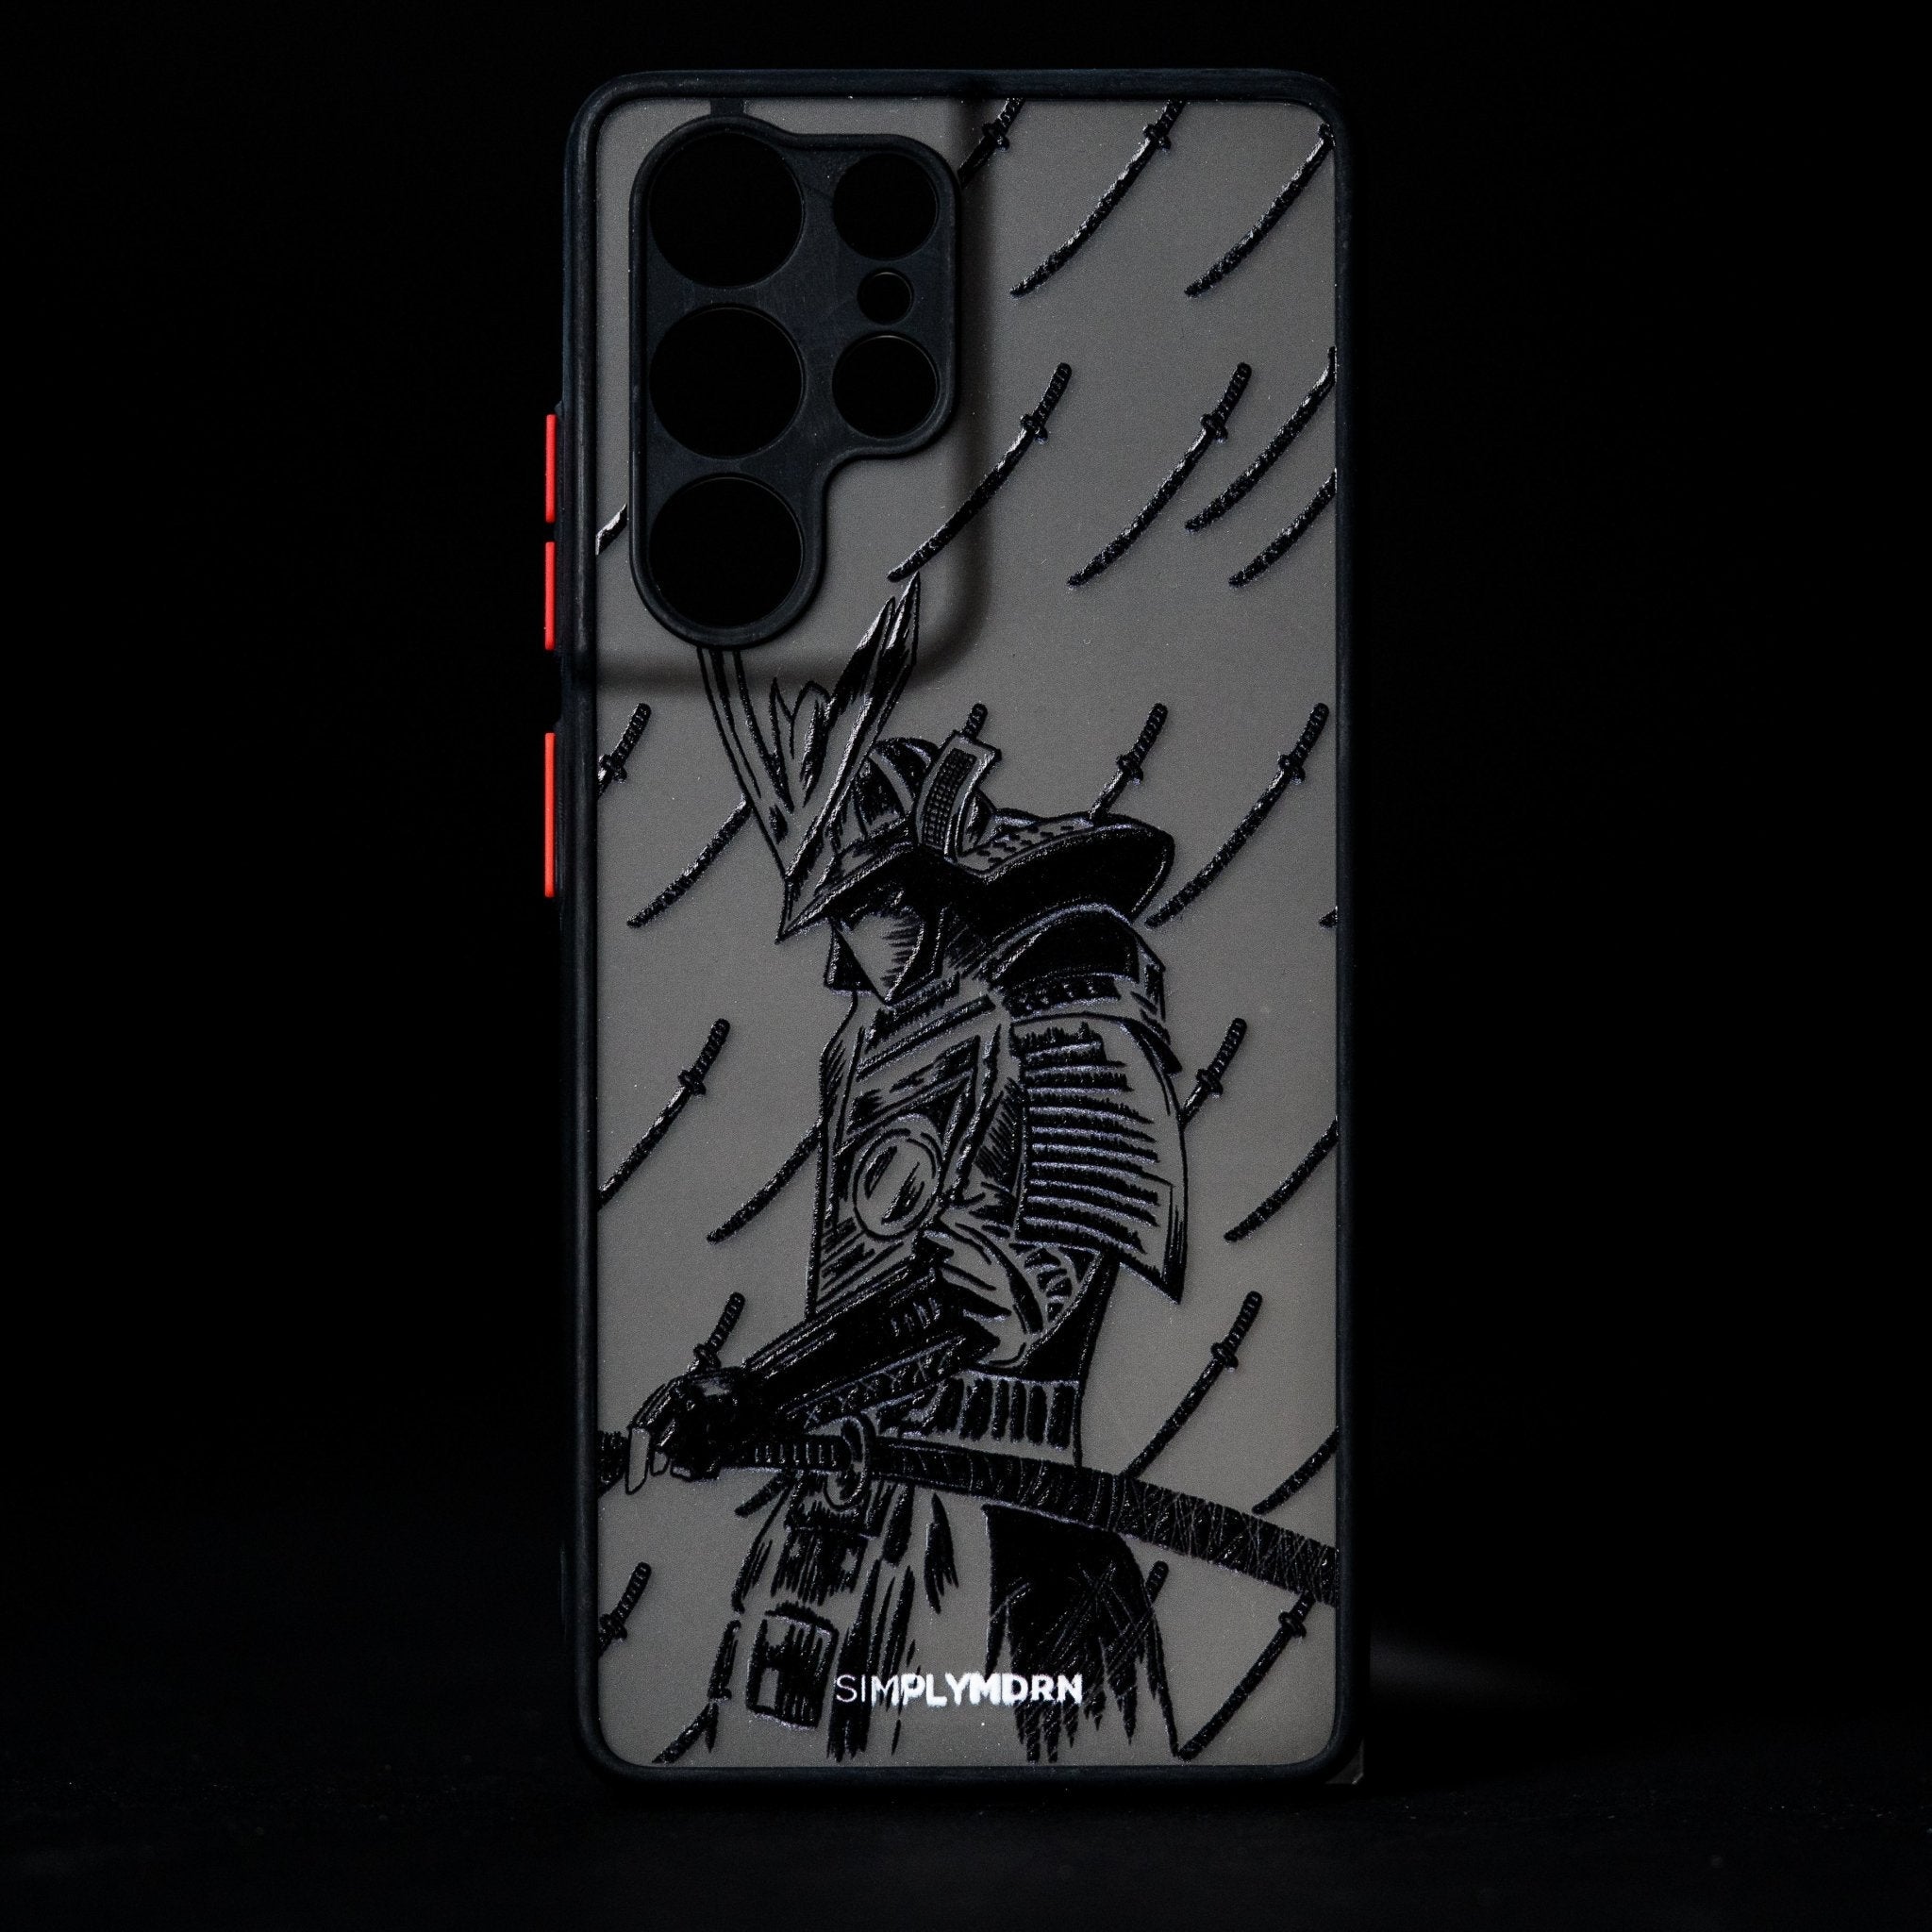 RONIN Tough Android case